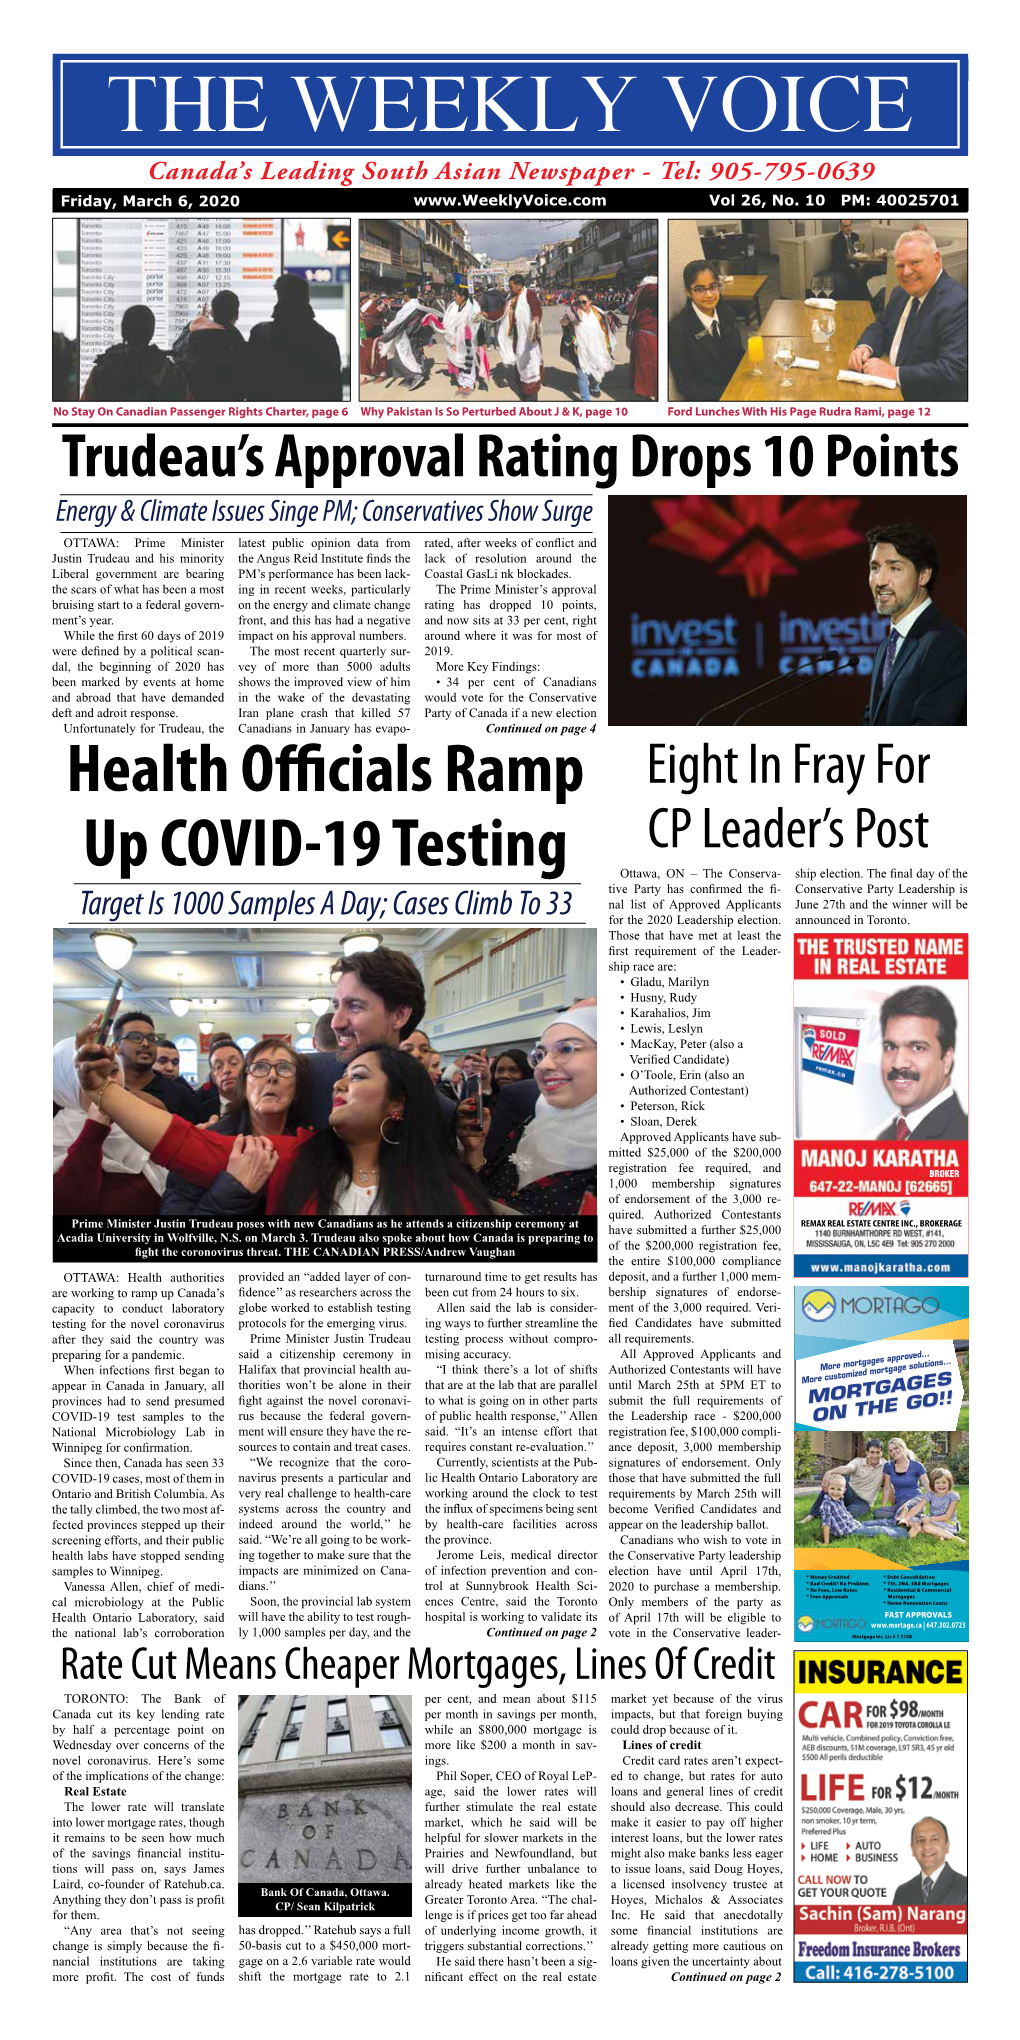 Health Officials Ramp up COVID-19 Testing